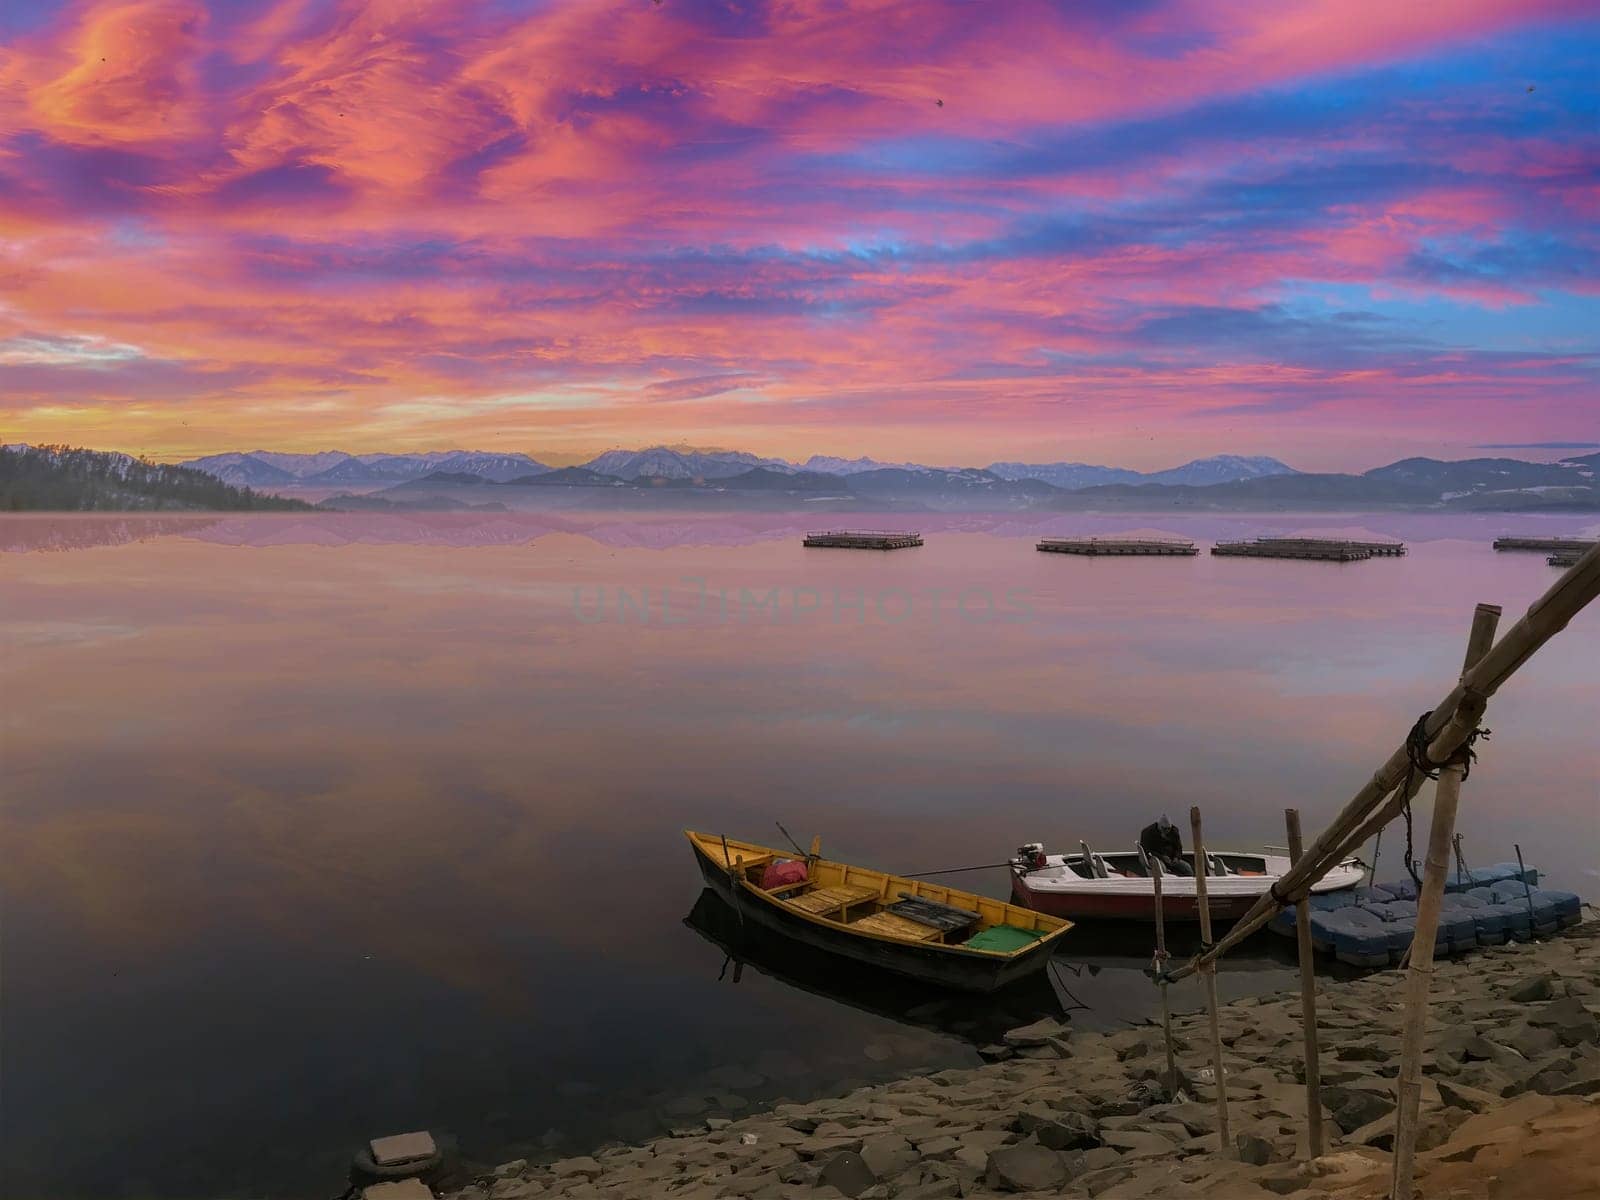 Very beautiful evening view of pink sky in the background with a boat in the foreground. A burst of evening pink light over the horizon with some boats stranded on the side. High-quality photo